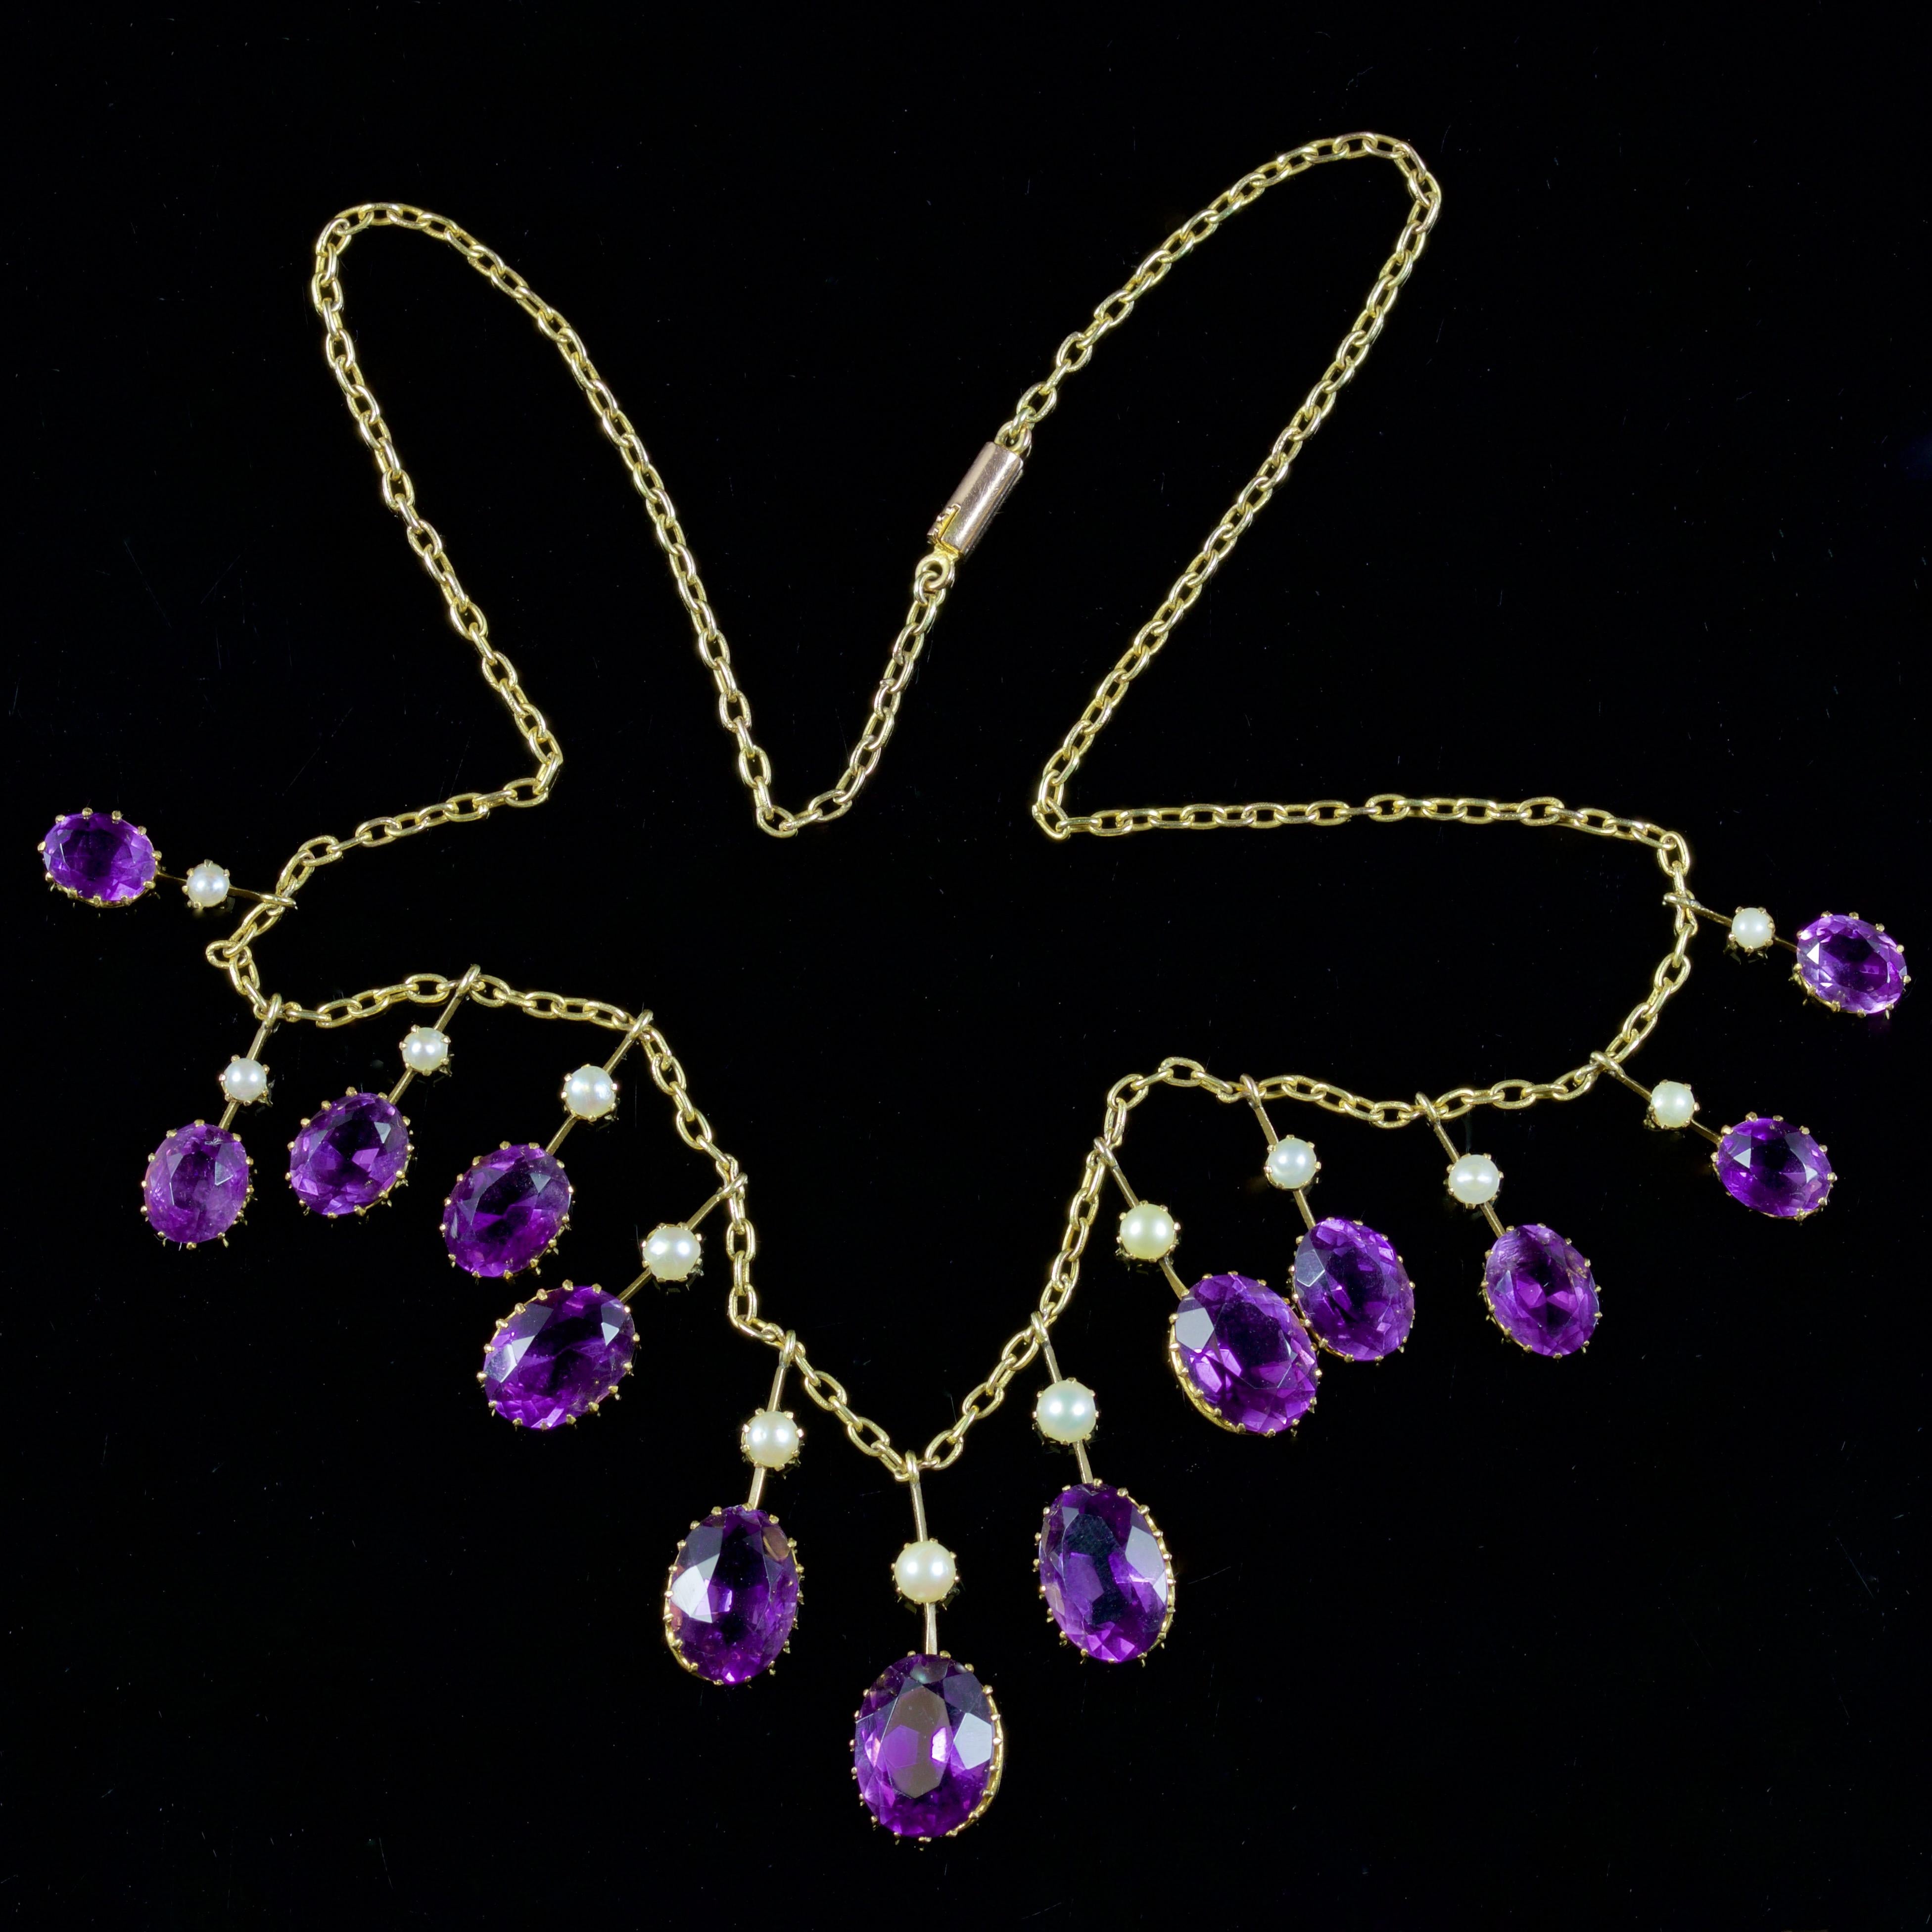 Antique Victorian 18 Carat Amethyst Pearl Garland Necklace, circa 1880 In Excellent Condition For Sale In Lancaster, Lancashire